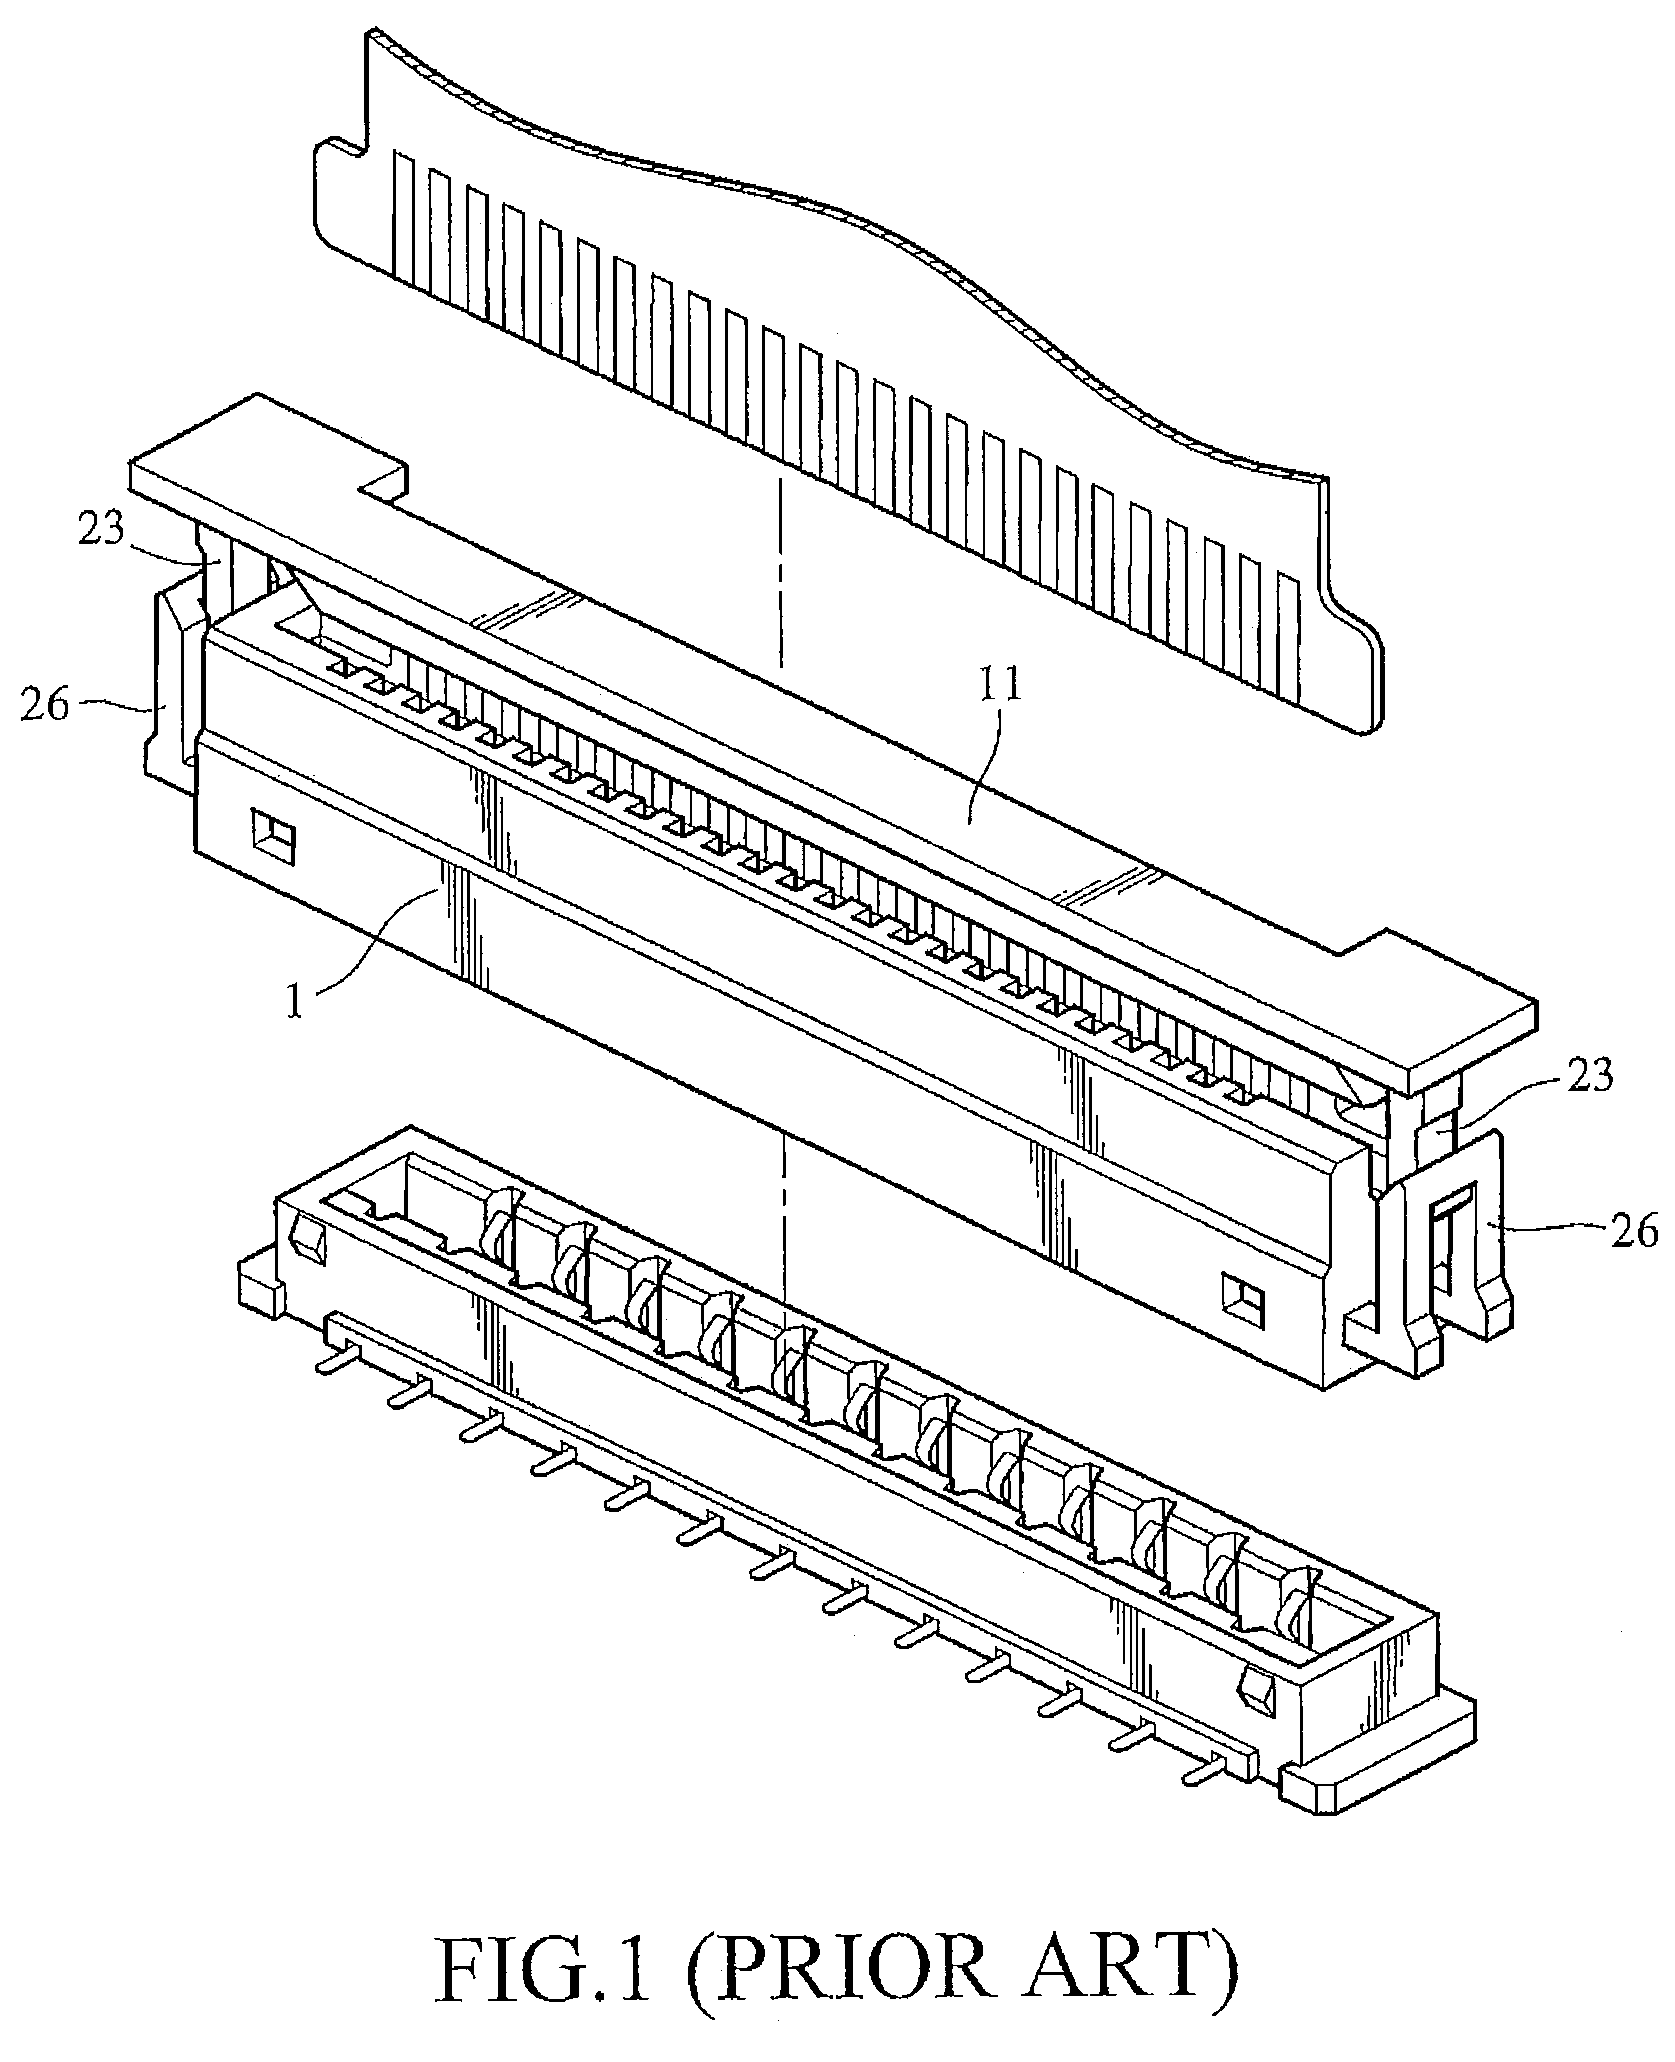 Connector for electronically connecting a cable and a printed circuit board